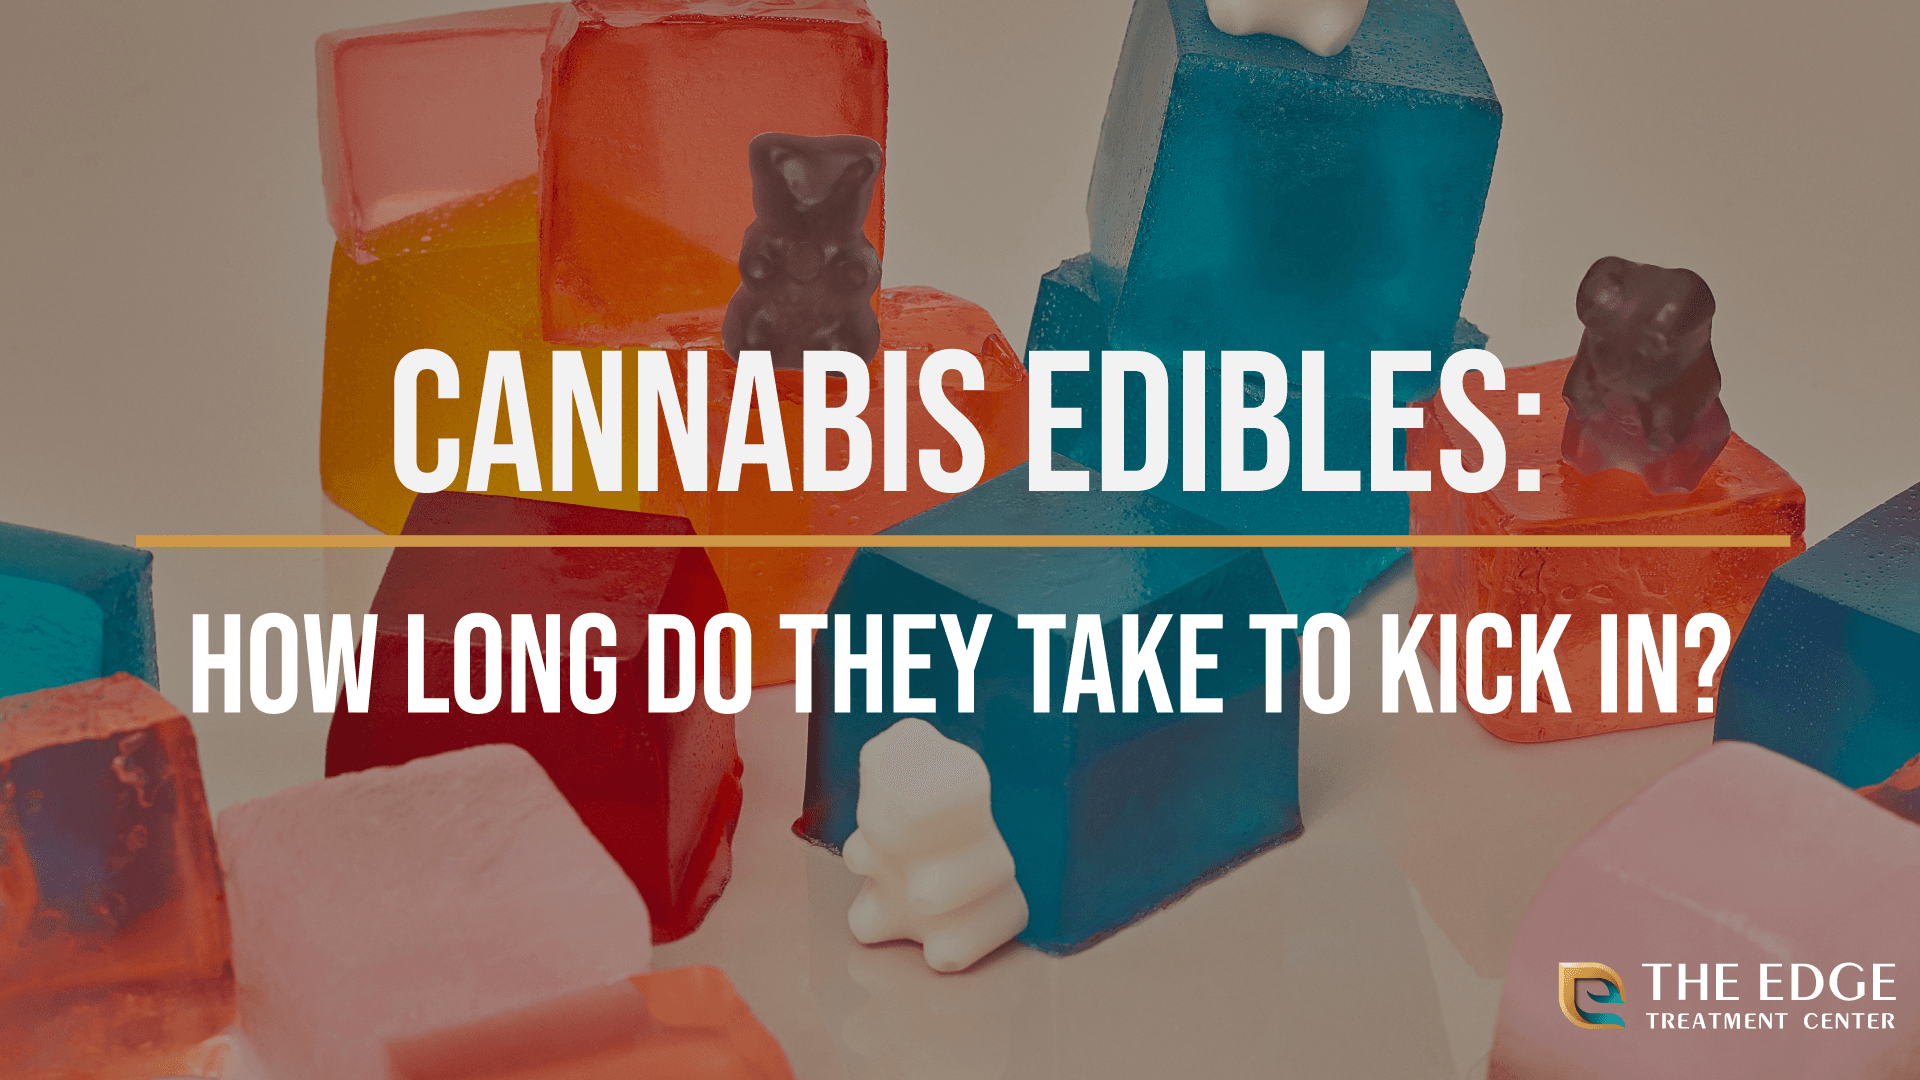 Timelines of cannabis edibles